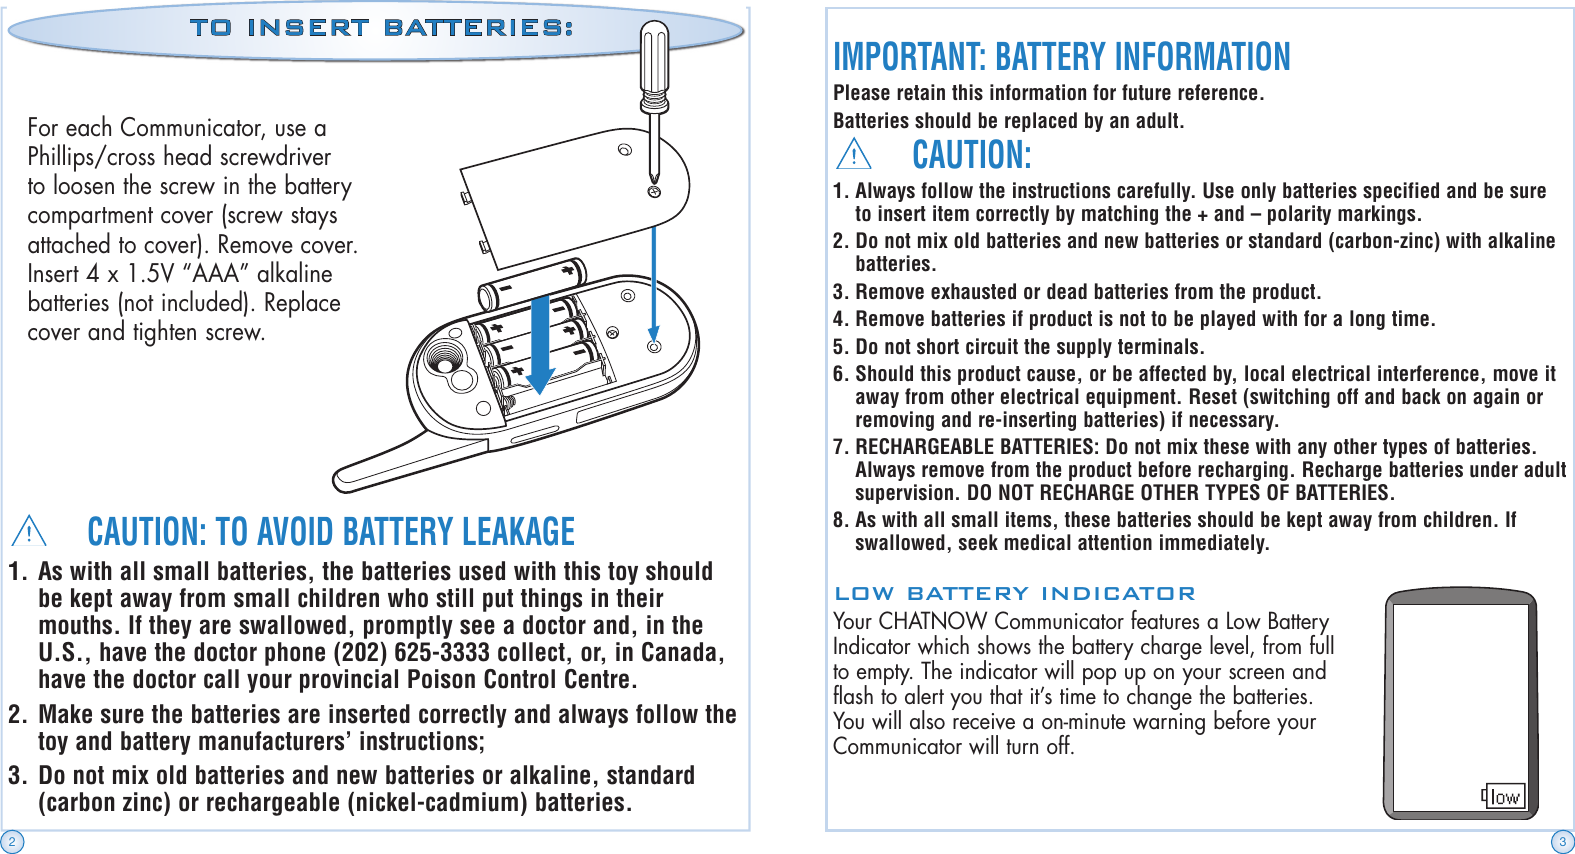 CAUTION:1. Always follow the instructions carefully. Use only batteries specified and be sure to insert item correctly by matching the + and – polarity markings.2. Do not mix old batteries and new batteries or standard (carbon-zinc) with alkaline batteries.3. Remove exhausted or dead batteries from the product.4. Remove batteries if product is not to be played with for a long time.5. Do not short circuit the supply terminals.6. Should this product cause, or be affected by, local electrical interference, move it away from other electrical equipment. Reset (switching off and back on again or removing and re-inserting batteries) if necessary.7. RECHARGEABLE BATTERIES: Do not mix these with any other types of batteries. Always remove from the product before recharging. Recharge batteries under adult supervision. DO NOT RECHARGE OTHER TYPES OF BATTERIES.8. As with all small items, these batteries should be kept away from children. If swallowed, seek medical attention immediately.IMPORTANT: BATTERY INFORMATIONPlease retain this information for future reference.Batteries should be replaced by an adult.LOW BATTERY INDICATORYour CHATNOW Communicator features a Low Battery Indicator which shows the battery charge level, from full to empty. The indicator will pop up on your screen and flash to alert you that it’s time to change the batteries. You will also receive a on-minute warning before your Communicator will turn off.CAUTION: TO AVOID BATTERY LEAKAGE1. As with all small batteries, the batteries used with this toy should be kept away from small children who still put things in their mouths. If they are swallowed, promptly see a doctor and, in the U.S., have the doctor phone (202) 625-3333 collect, or, in Canada, have the doctor call your provincial Poison Control Centre.2. Make sure the batteries are inserted correctly and always follow the toy and battery manufacturers’ instructions;3. Do not mix old batteries and new batteries or alkaline, standard (carbon zinc) or rechargeable (nickel-cadmium) batteries.For each Communicator, use a Phillips/cross head screwdriver to loosen the screw in the battery compartment cover (screw stays attached to cover). Remove cover. Insert 4 x 1.5V “AAA” alkaline batteries (not included). Replace cover and tighten screw.TO INSERT BATTERIES:2 3